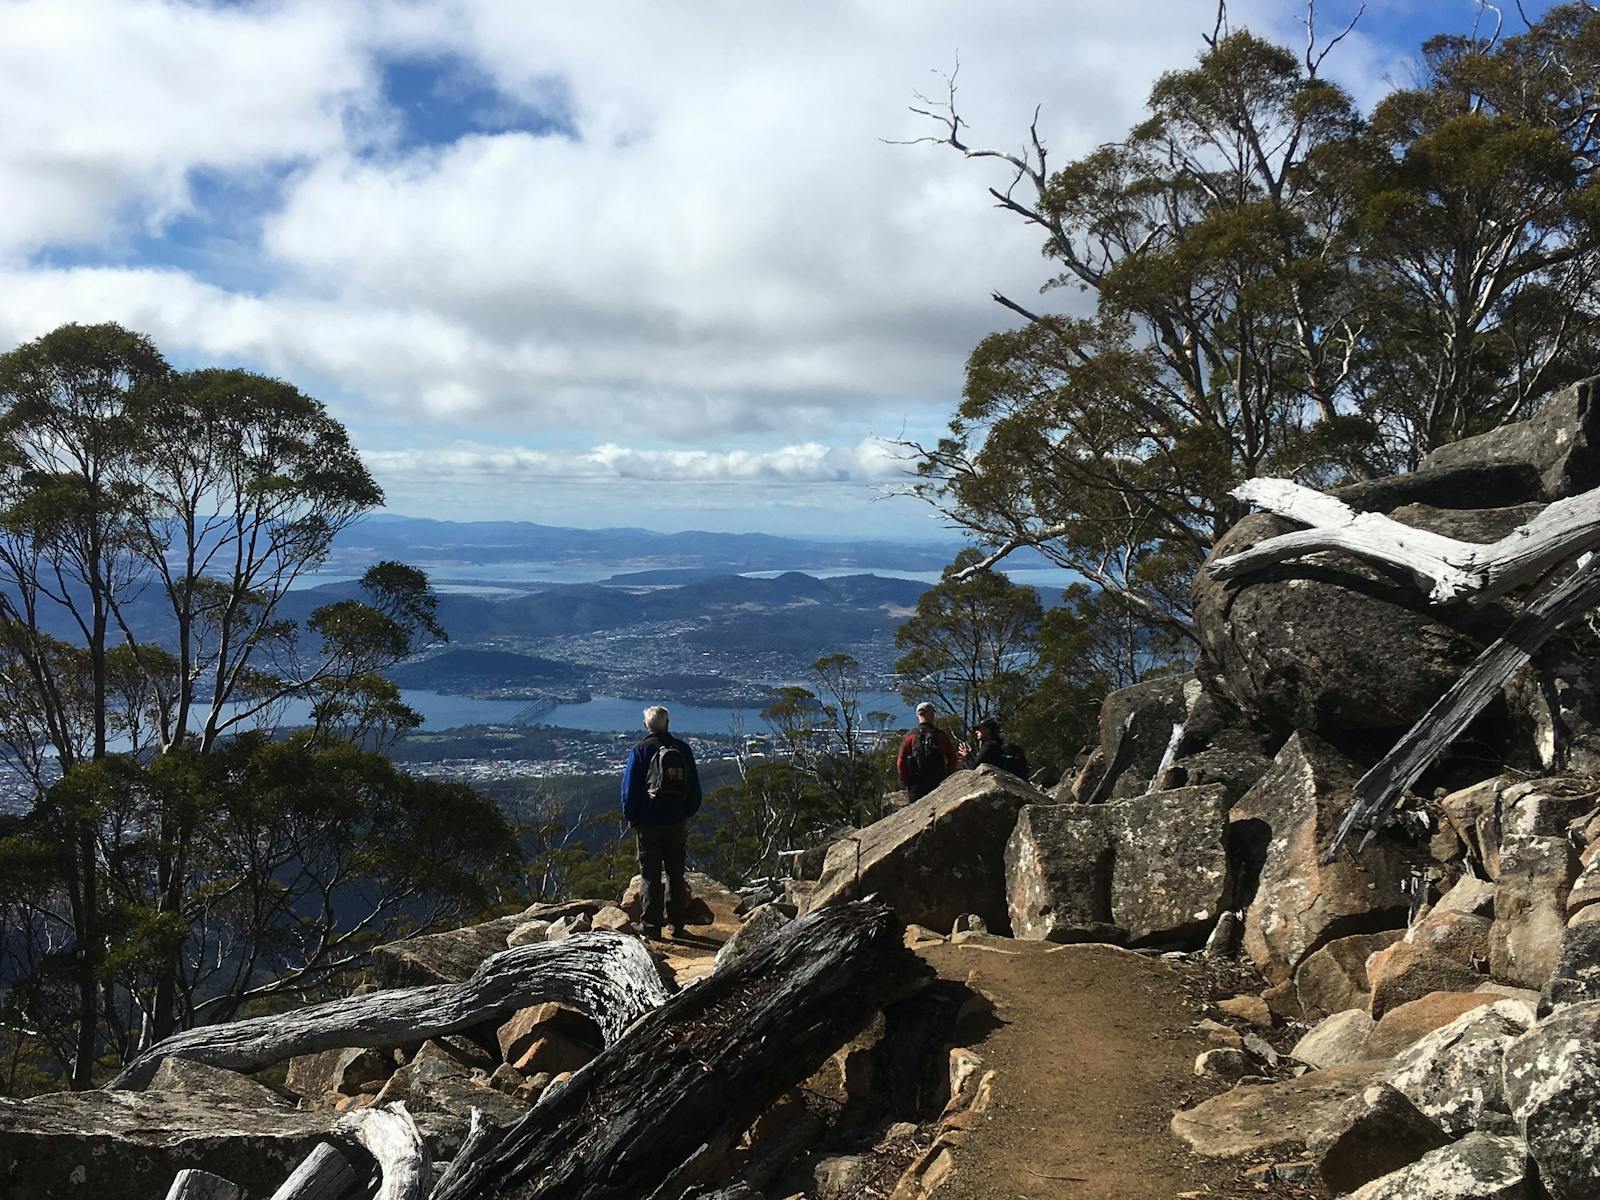 Bushwalkers enjoying the views from the Organ Pipes Track.